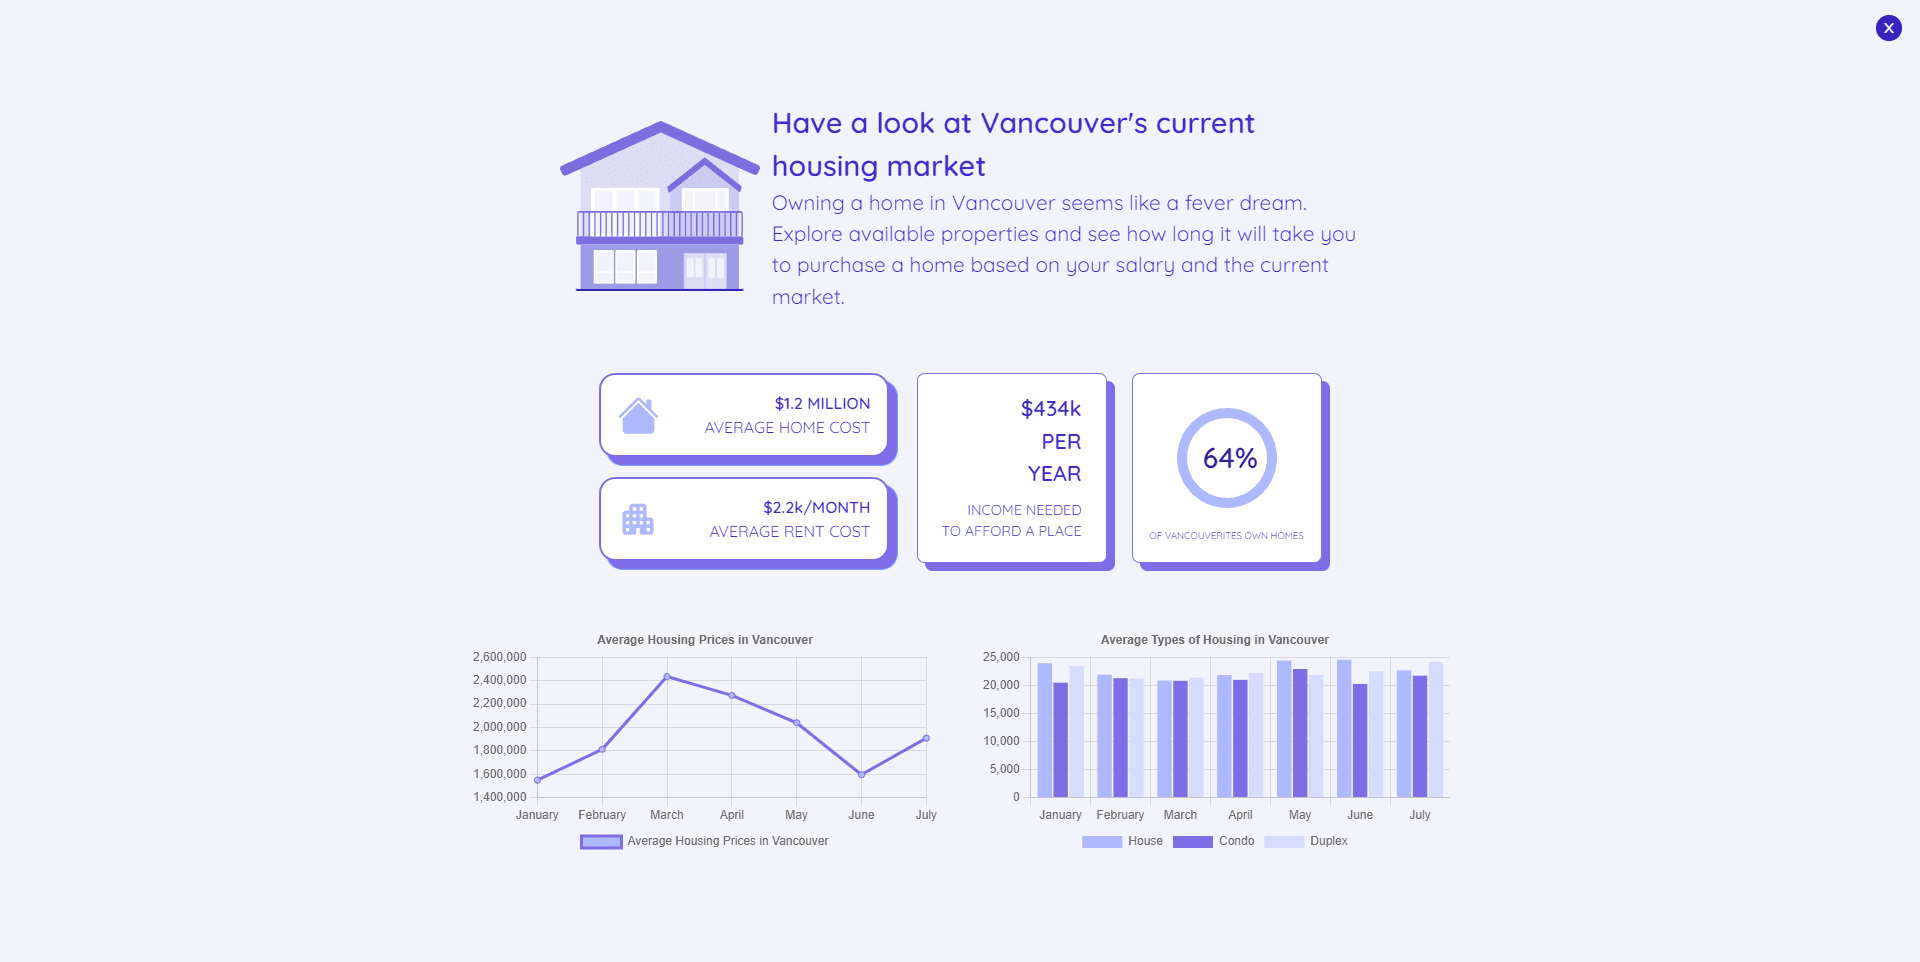 Statistics provided based off the Vancouver's housing market.